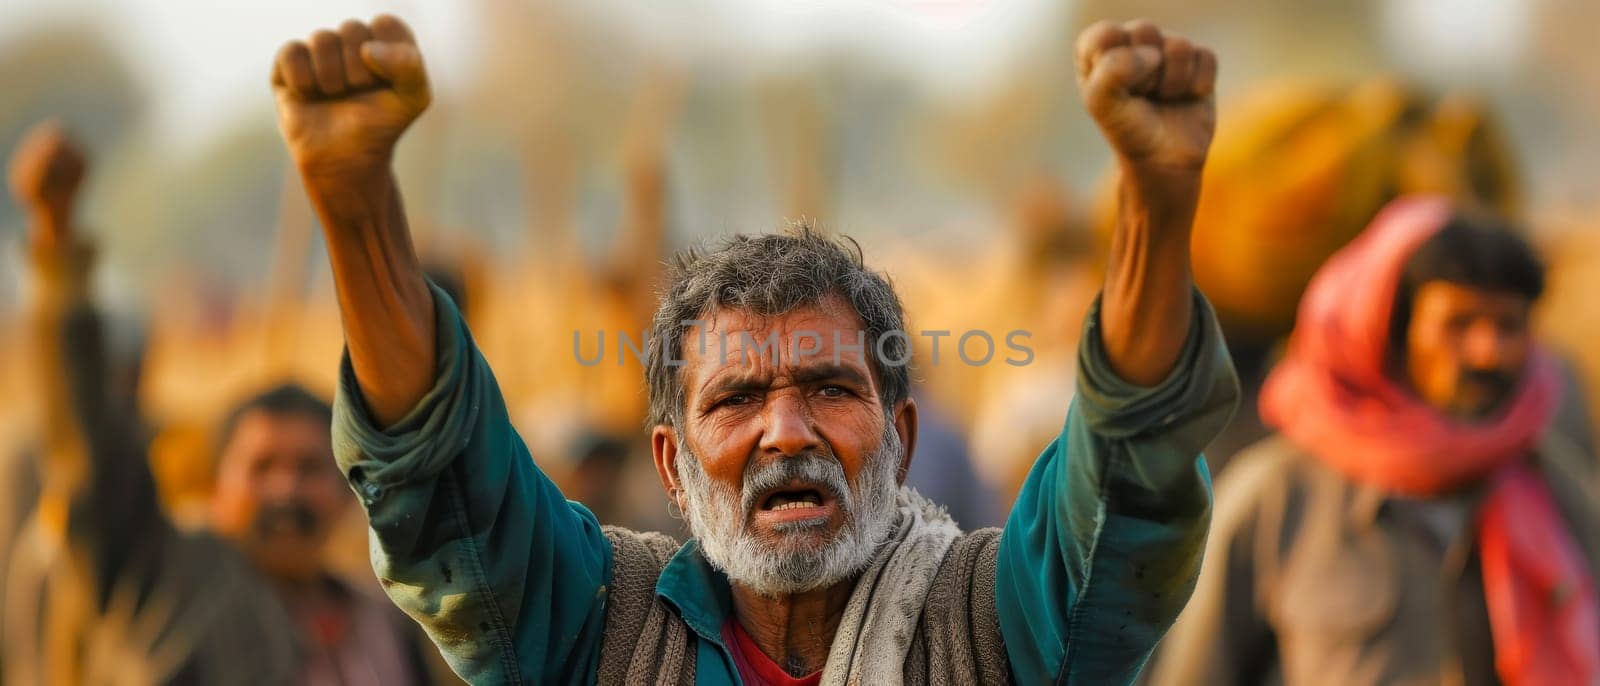 Middle-aged protester with fierce expression, raising his fist in a call for action